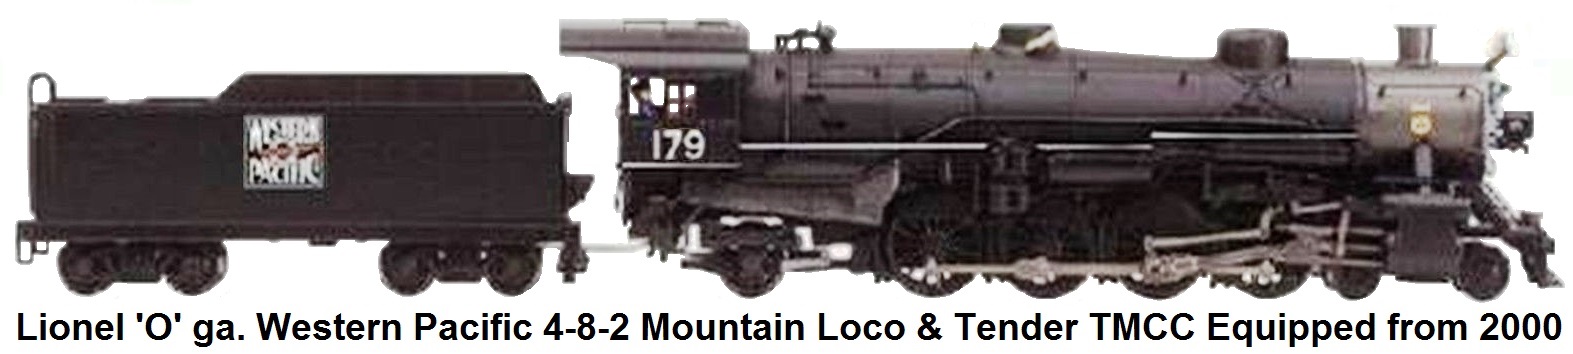 Lionel 'O' gauge #6-28059 Western Pacific TMCC Equipped 4-8-2 Mountain Loco and Tender introduced in 2000